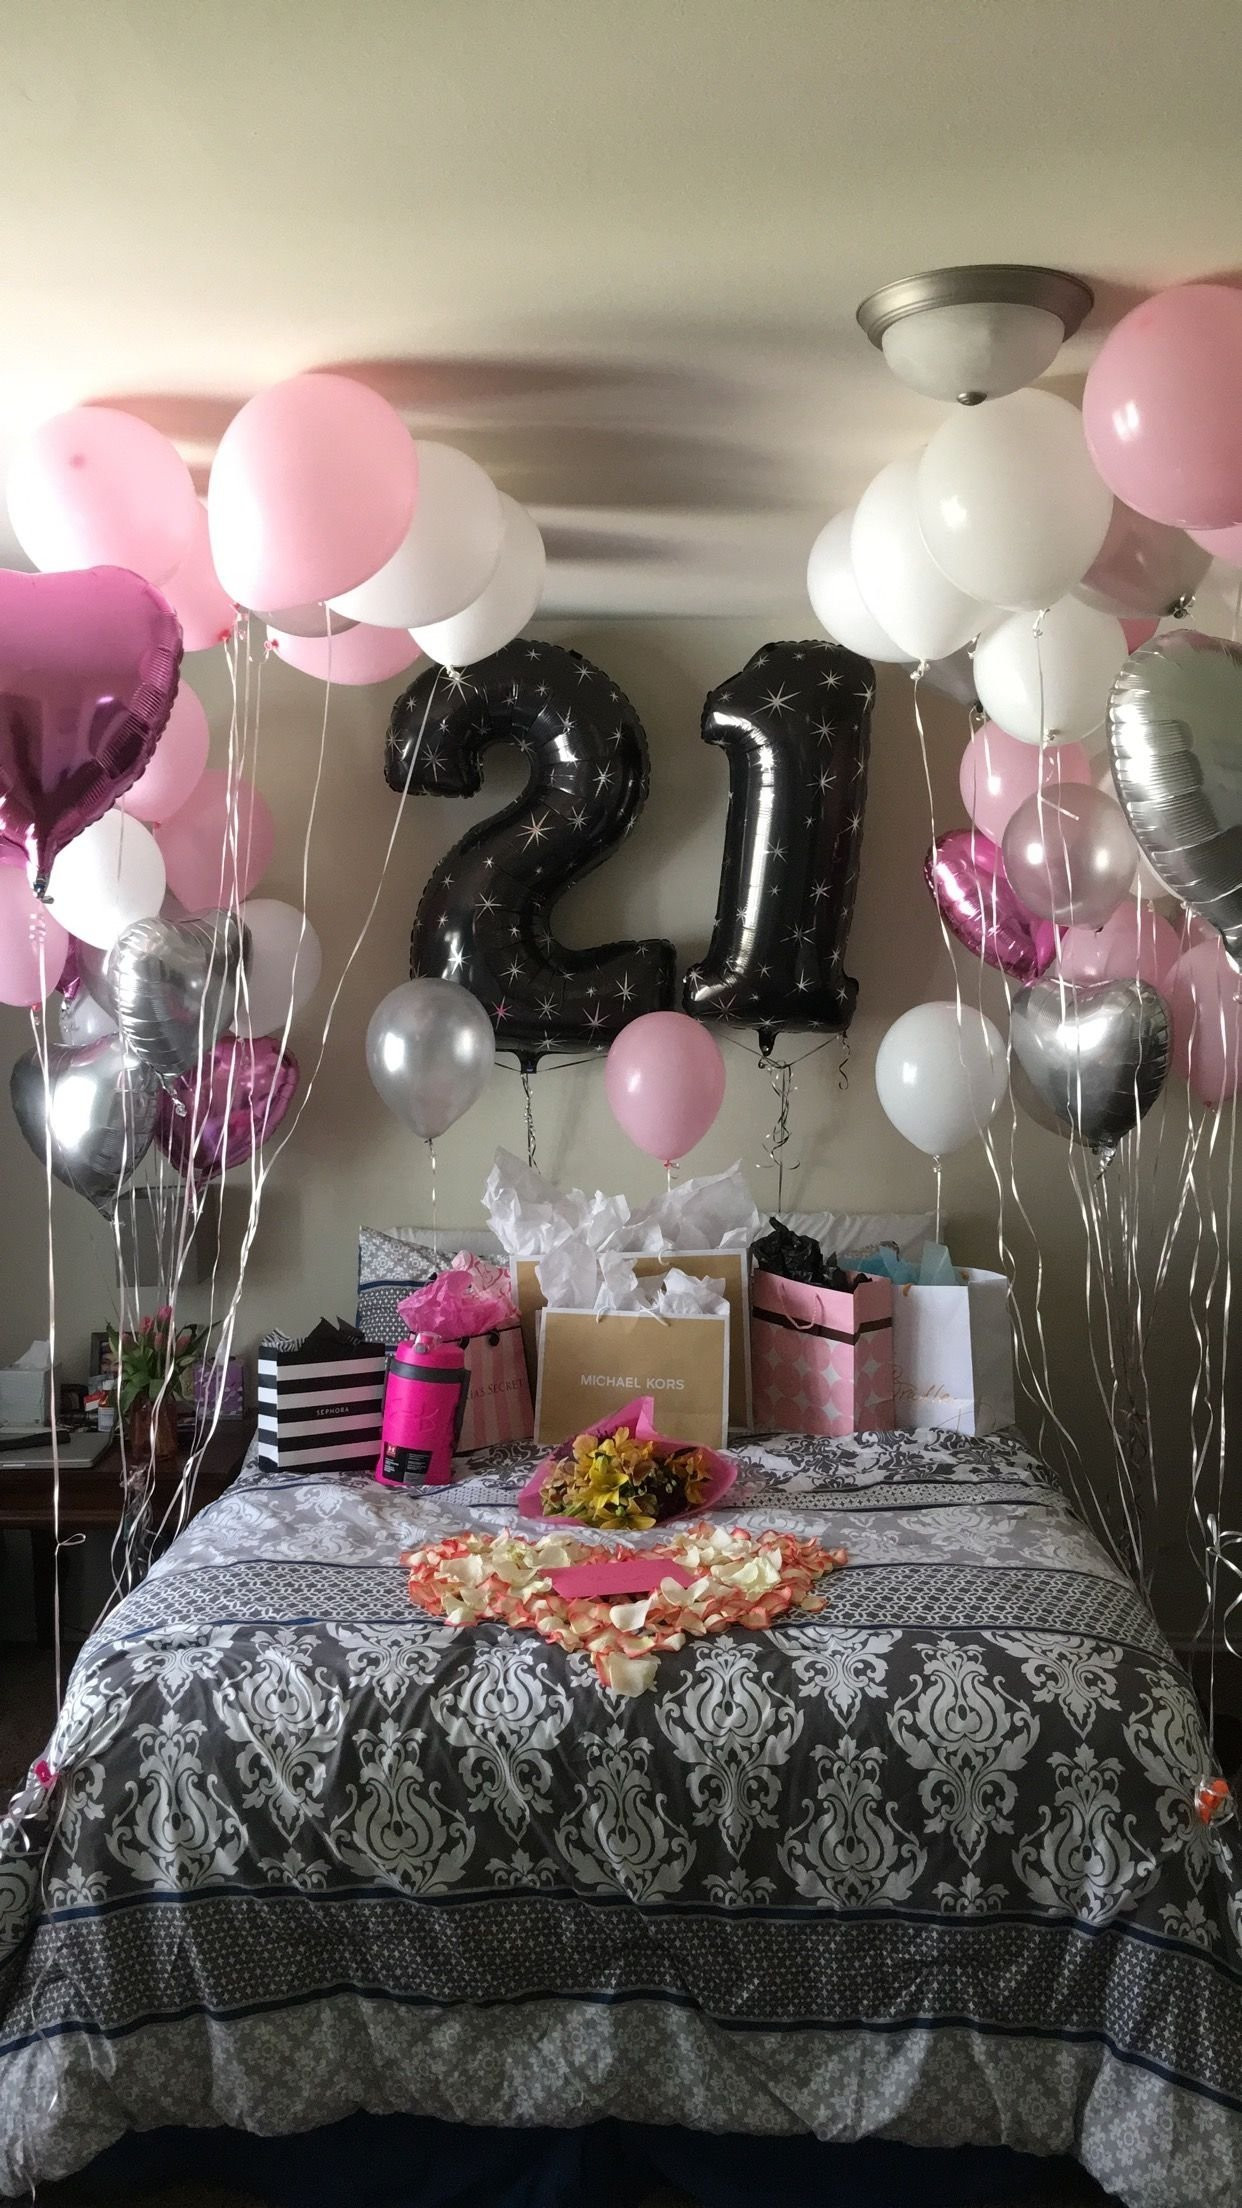 Simple Gift Ideas For Girlfriend
 10 Fashionable Birthday Surprise Ideas For Girlfriend 2020